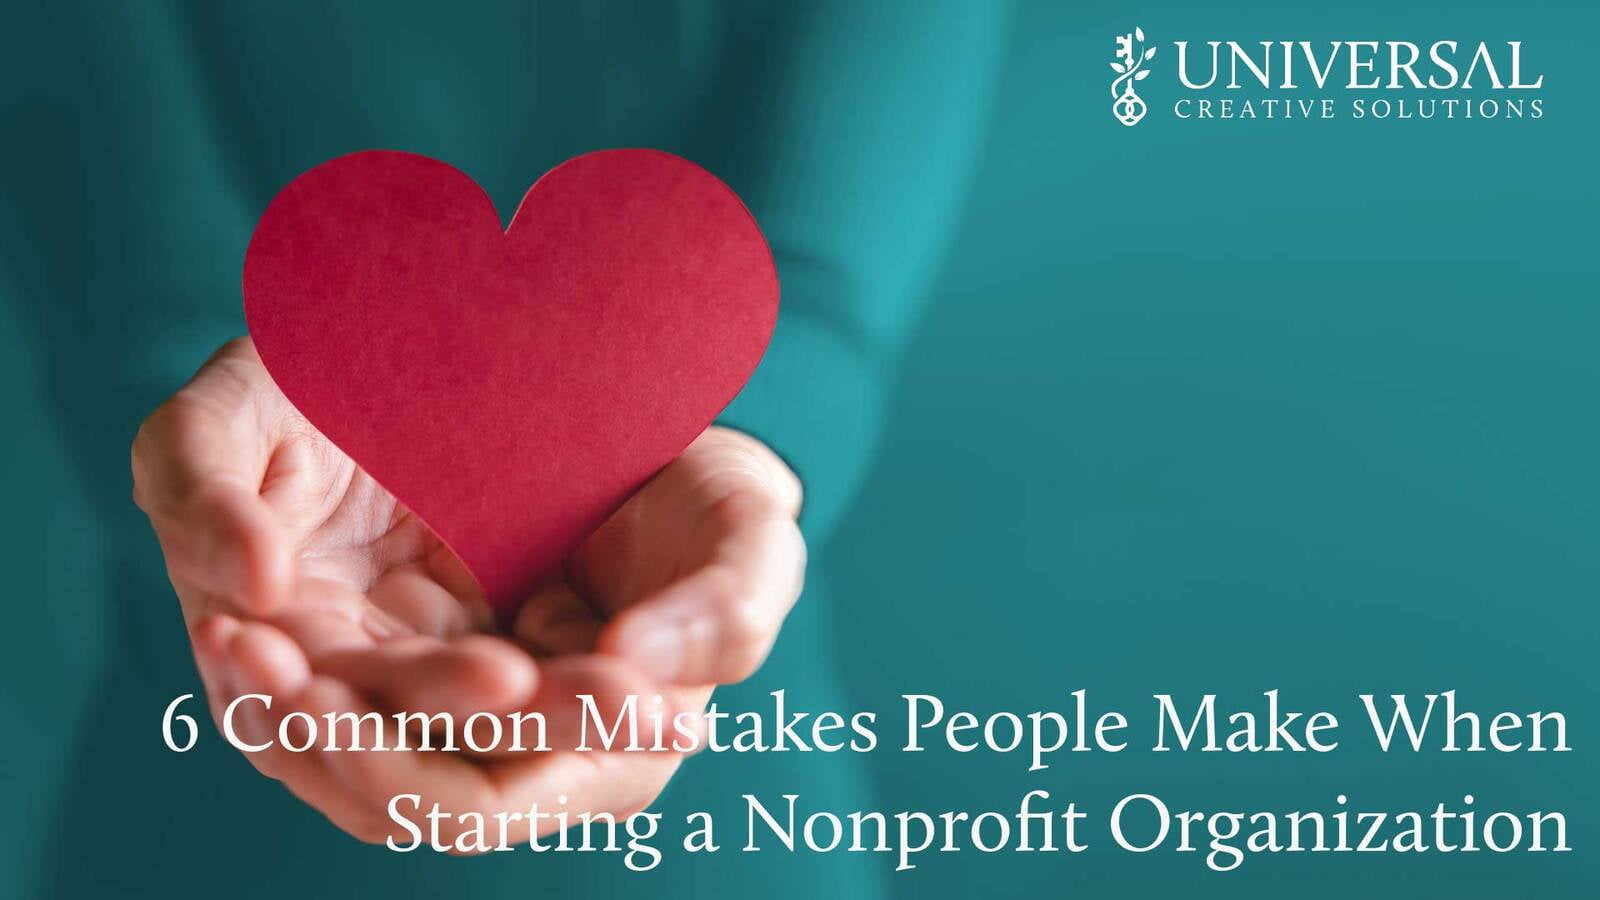 6 Common Mistakes People Make When Starting a Nonprofit Organization